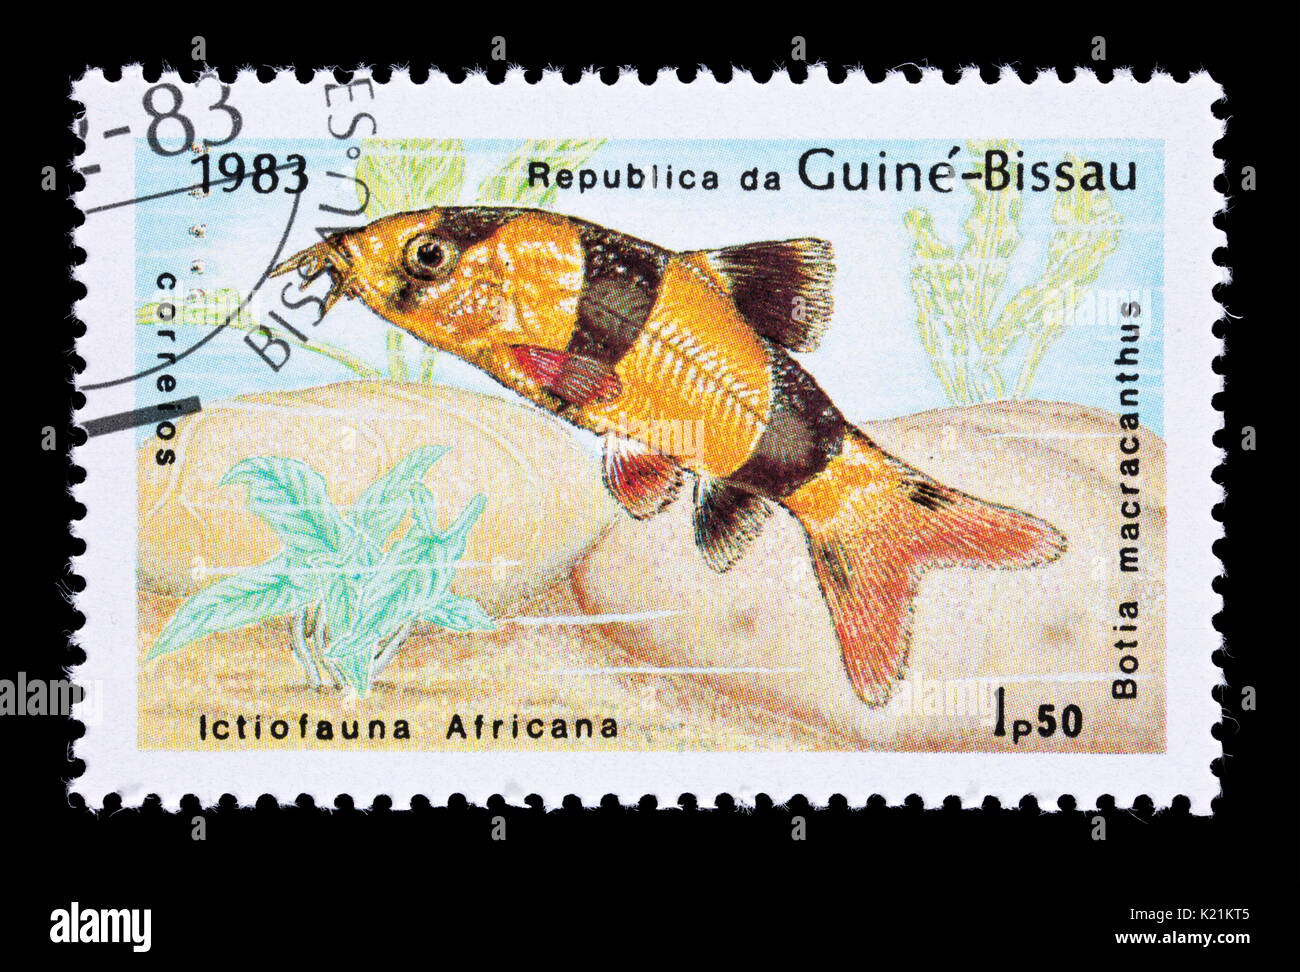 Postage stamp from Guinea-Bissau depicting a clown loach (Botia macracanthus) Stock Photo